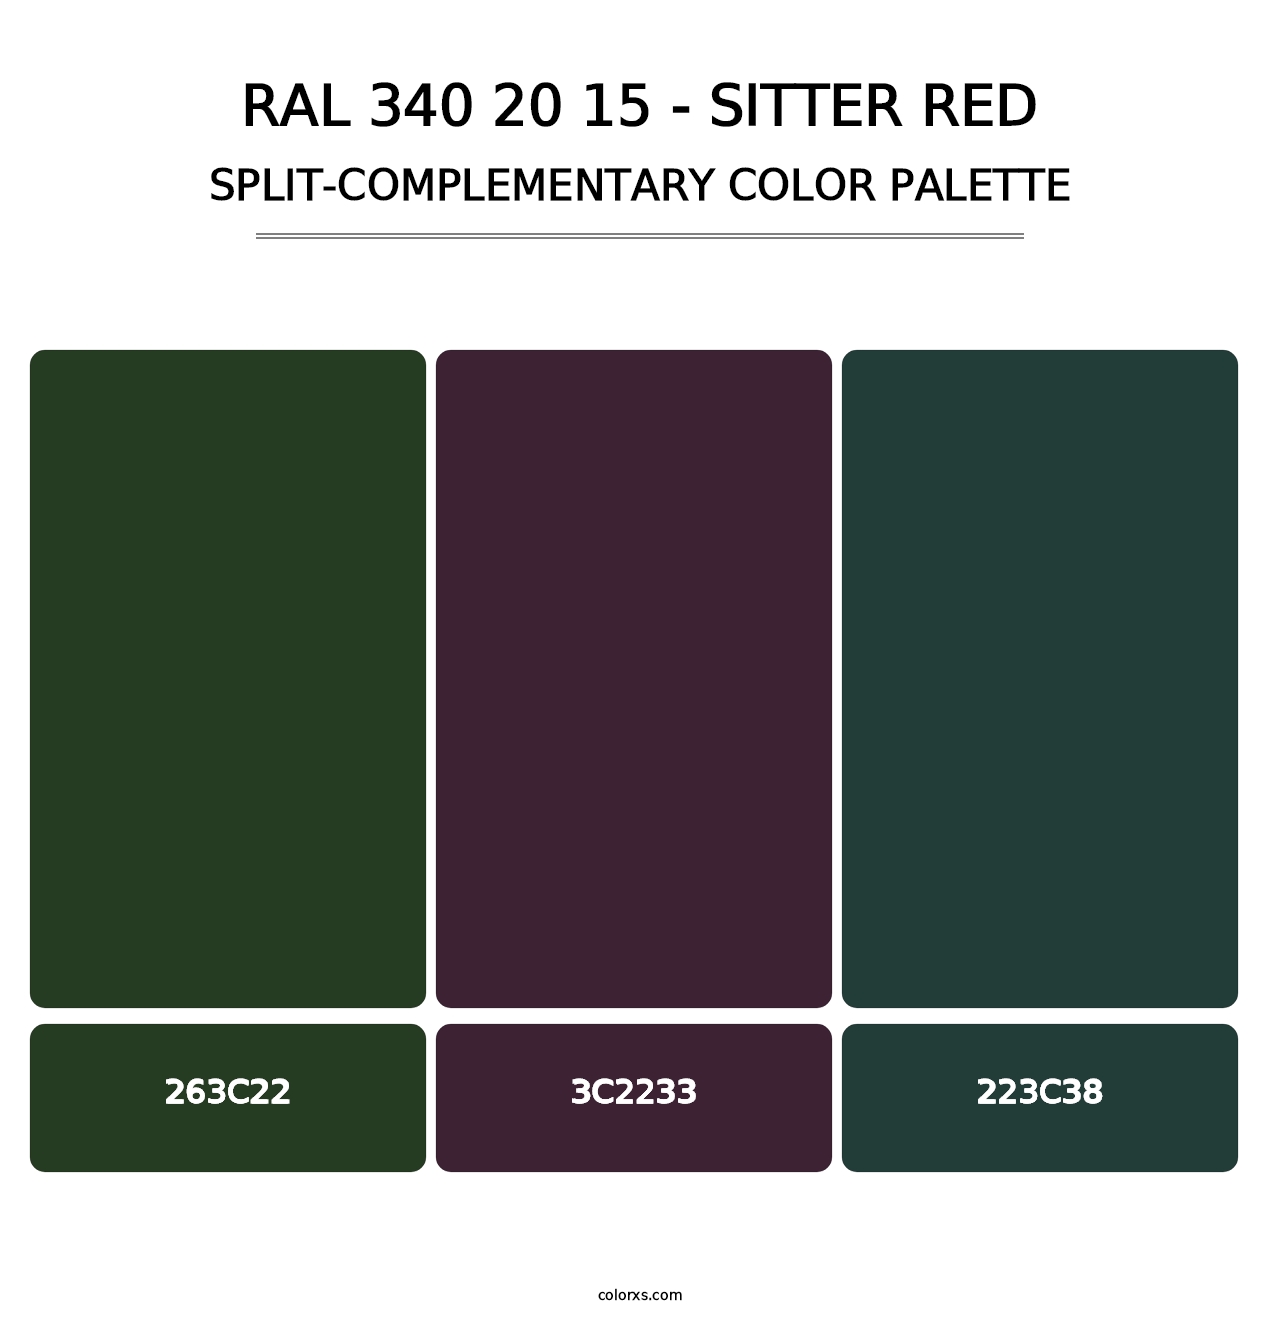 RAL 340 20 15 - Sitter Red - Split-Complementary Color Palette